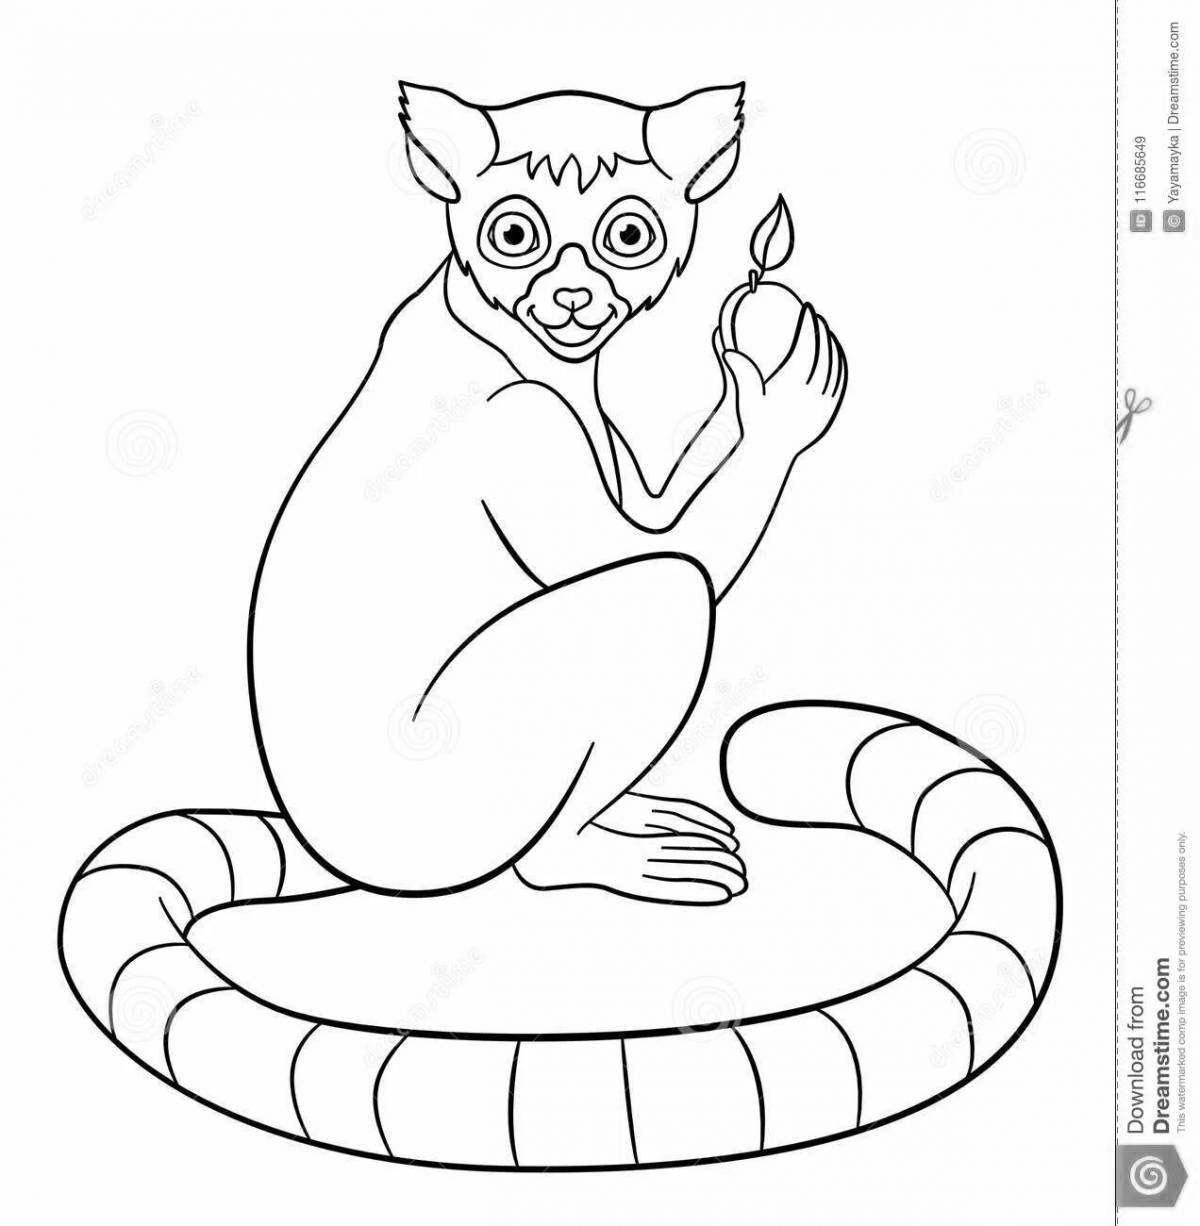 Animated loris coloring page